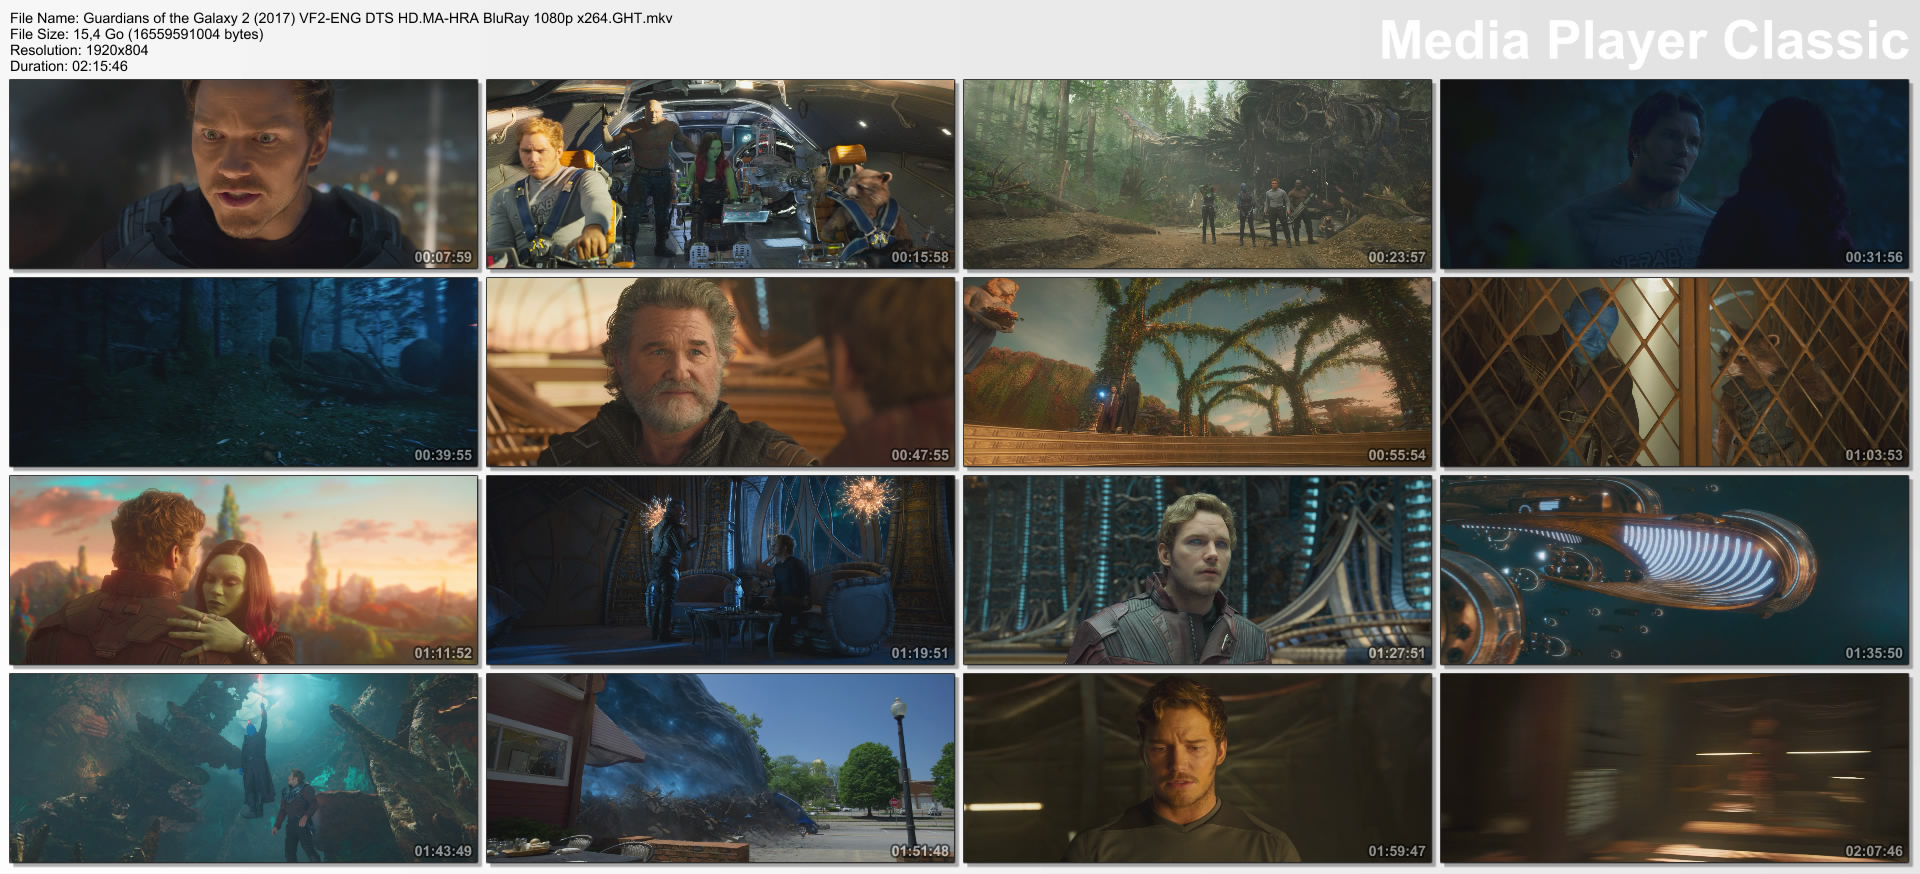 Guardians of the Galaxy 2 (2017) VF2-ENG DTS HD.MA-HRA BluRay 1080p x264.GHT